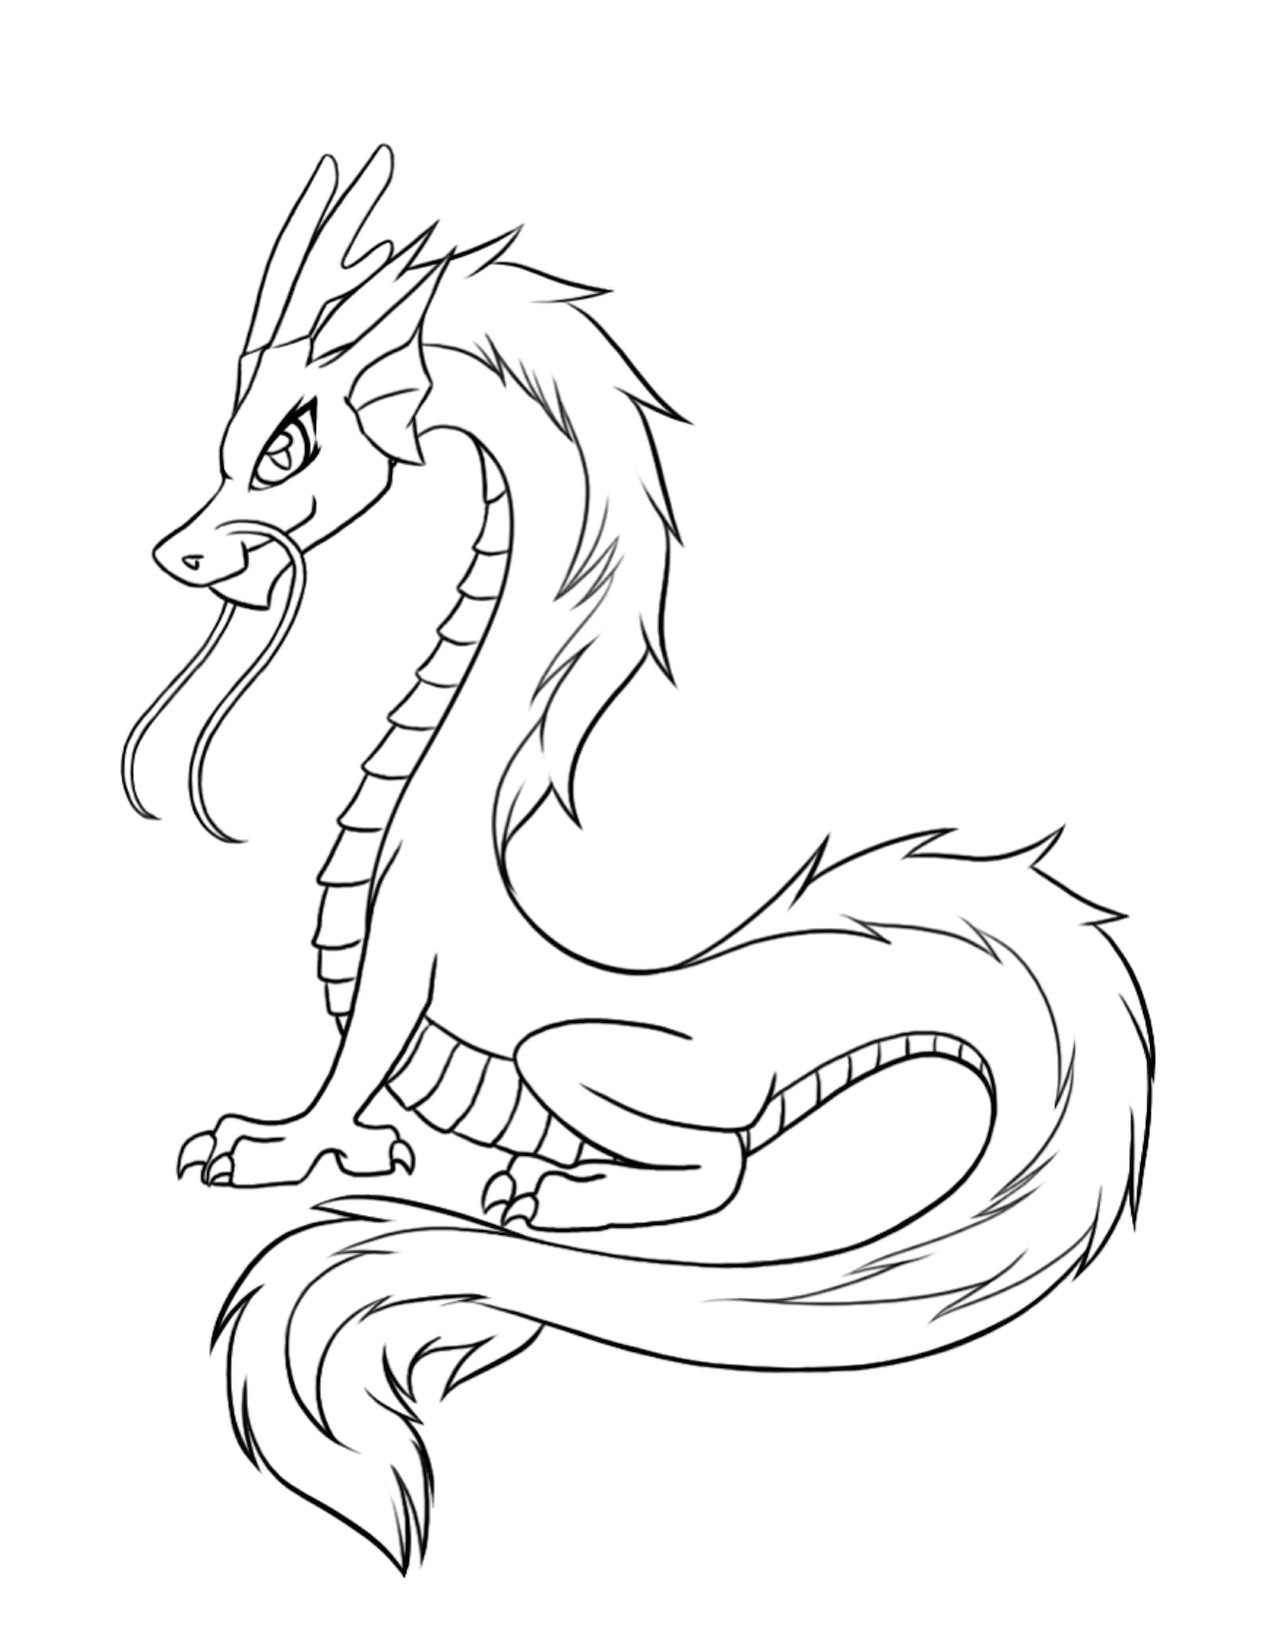 Dragon S Claw Drawing Free Printable Dragon Coloring Pages for Kids Dragon Sketch